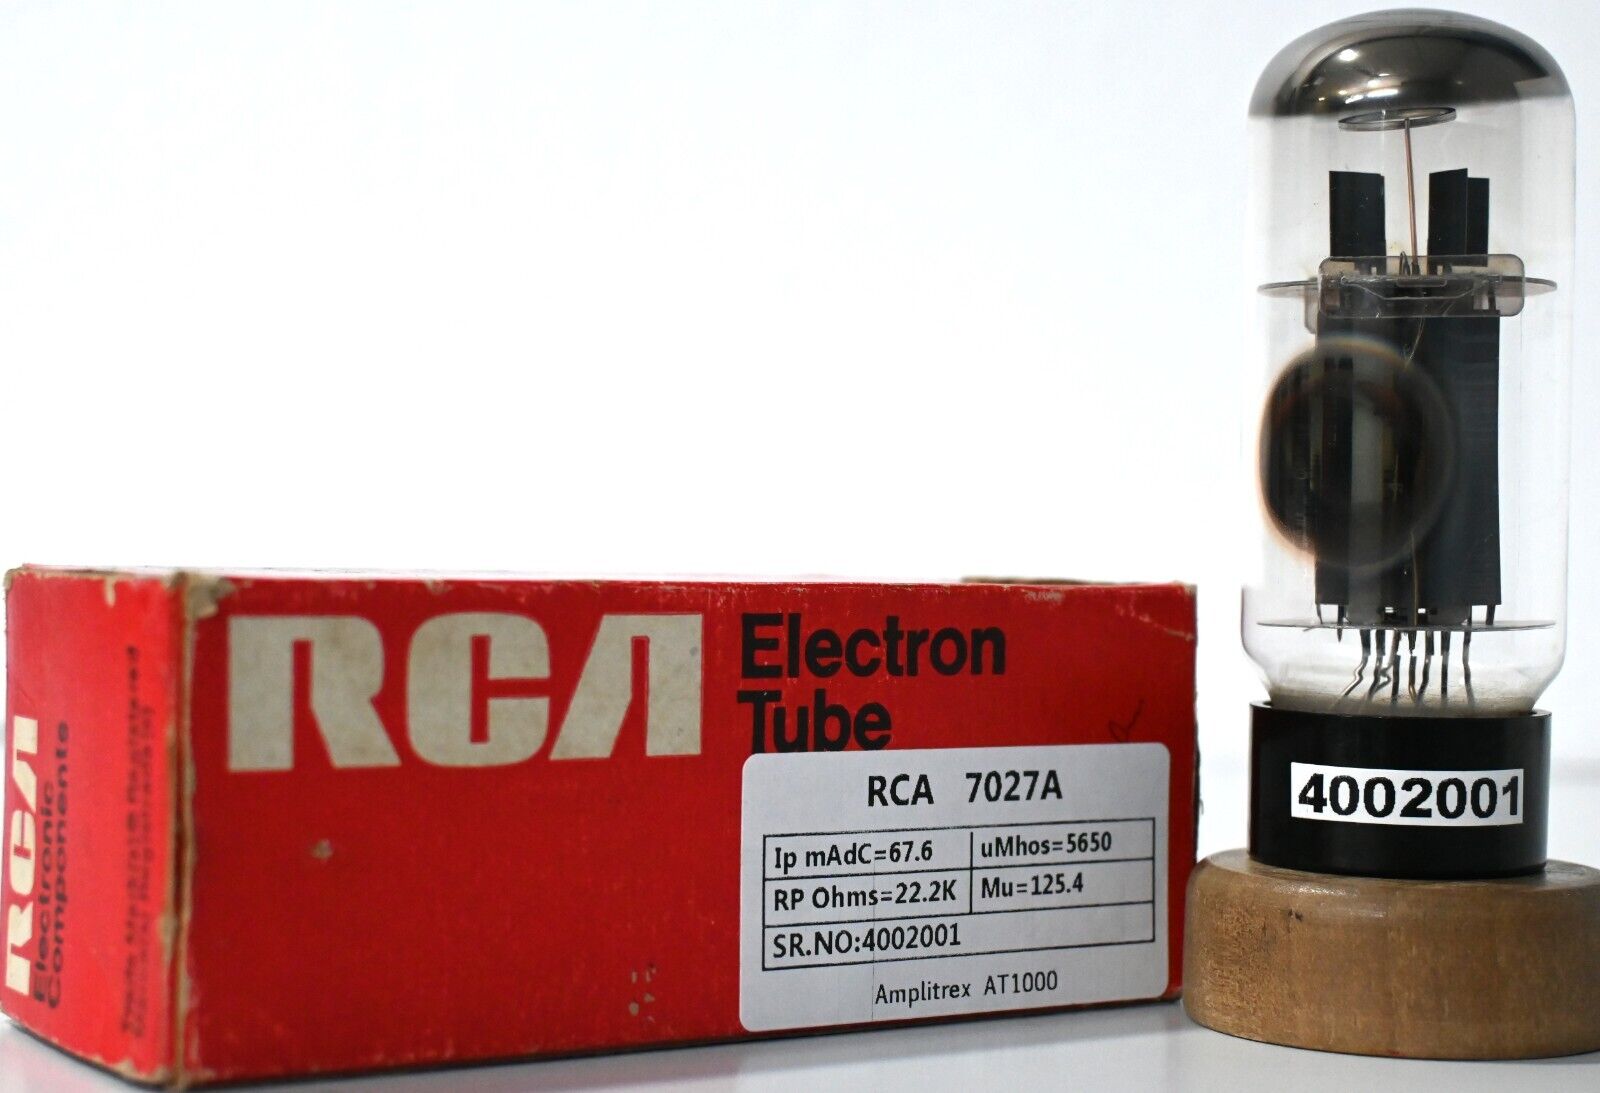 7027A RCA Black Base made in U.S.A Amplitrex AT1000 Tested Qty 1 Pc